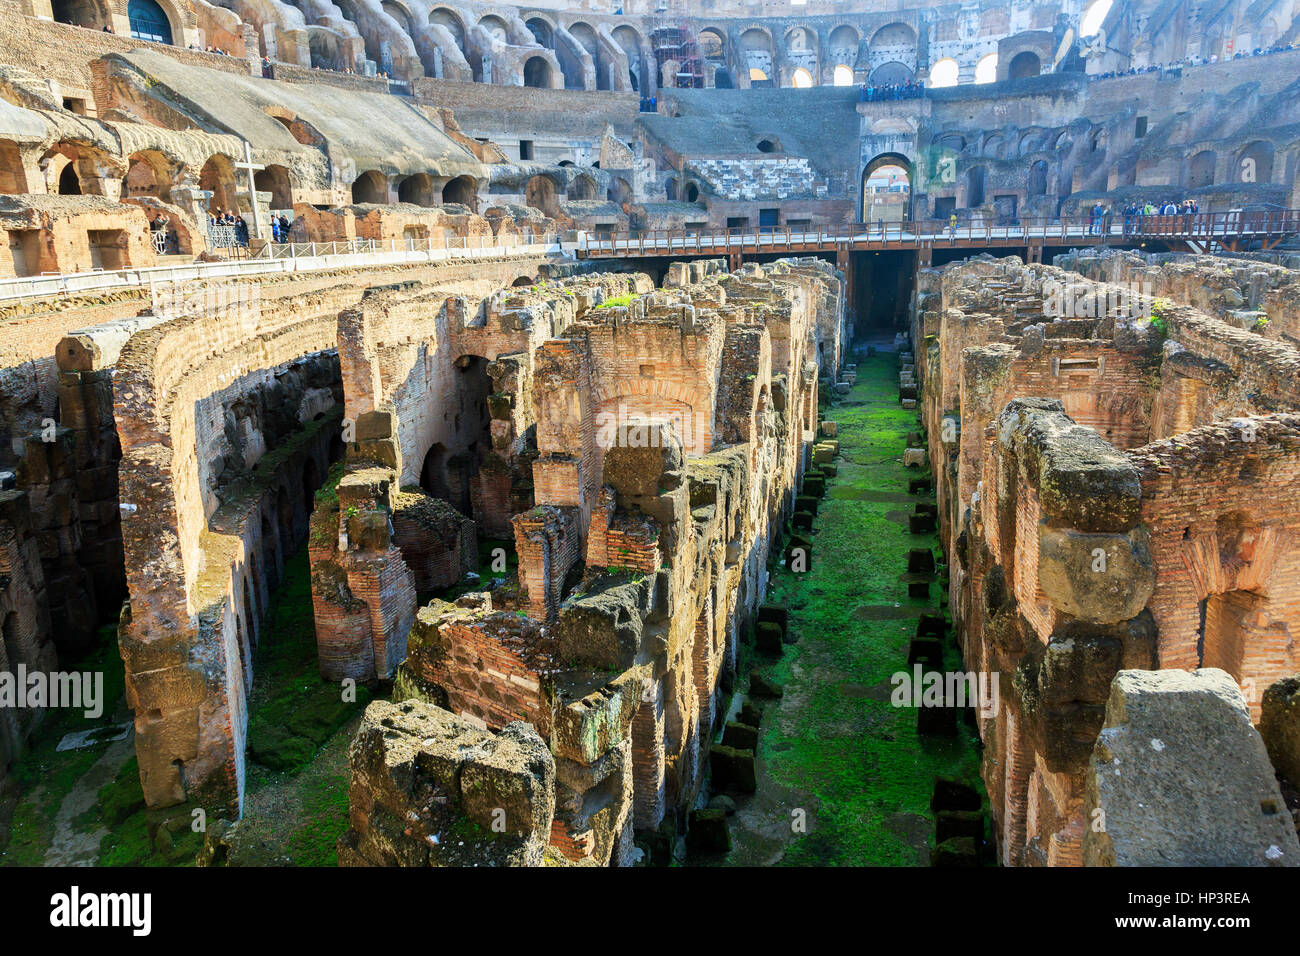 Views of the Roman Colosseum also known as Flavian amphitheatre, Rome, Italy Stock Photo